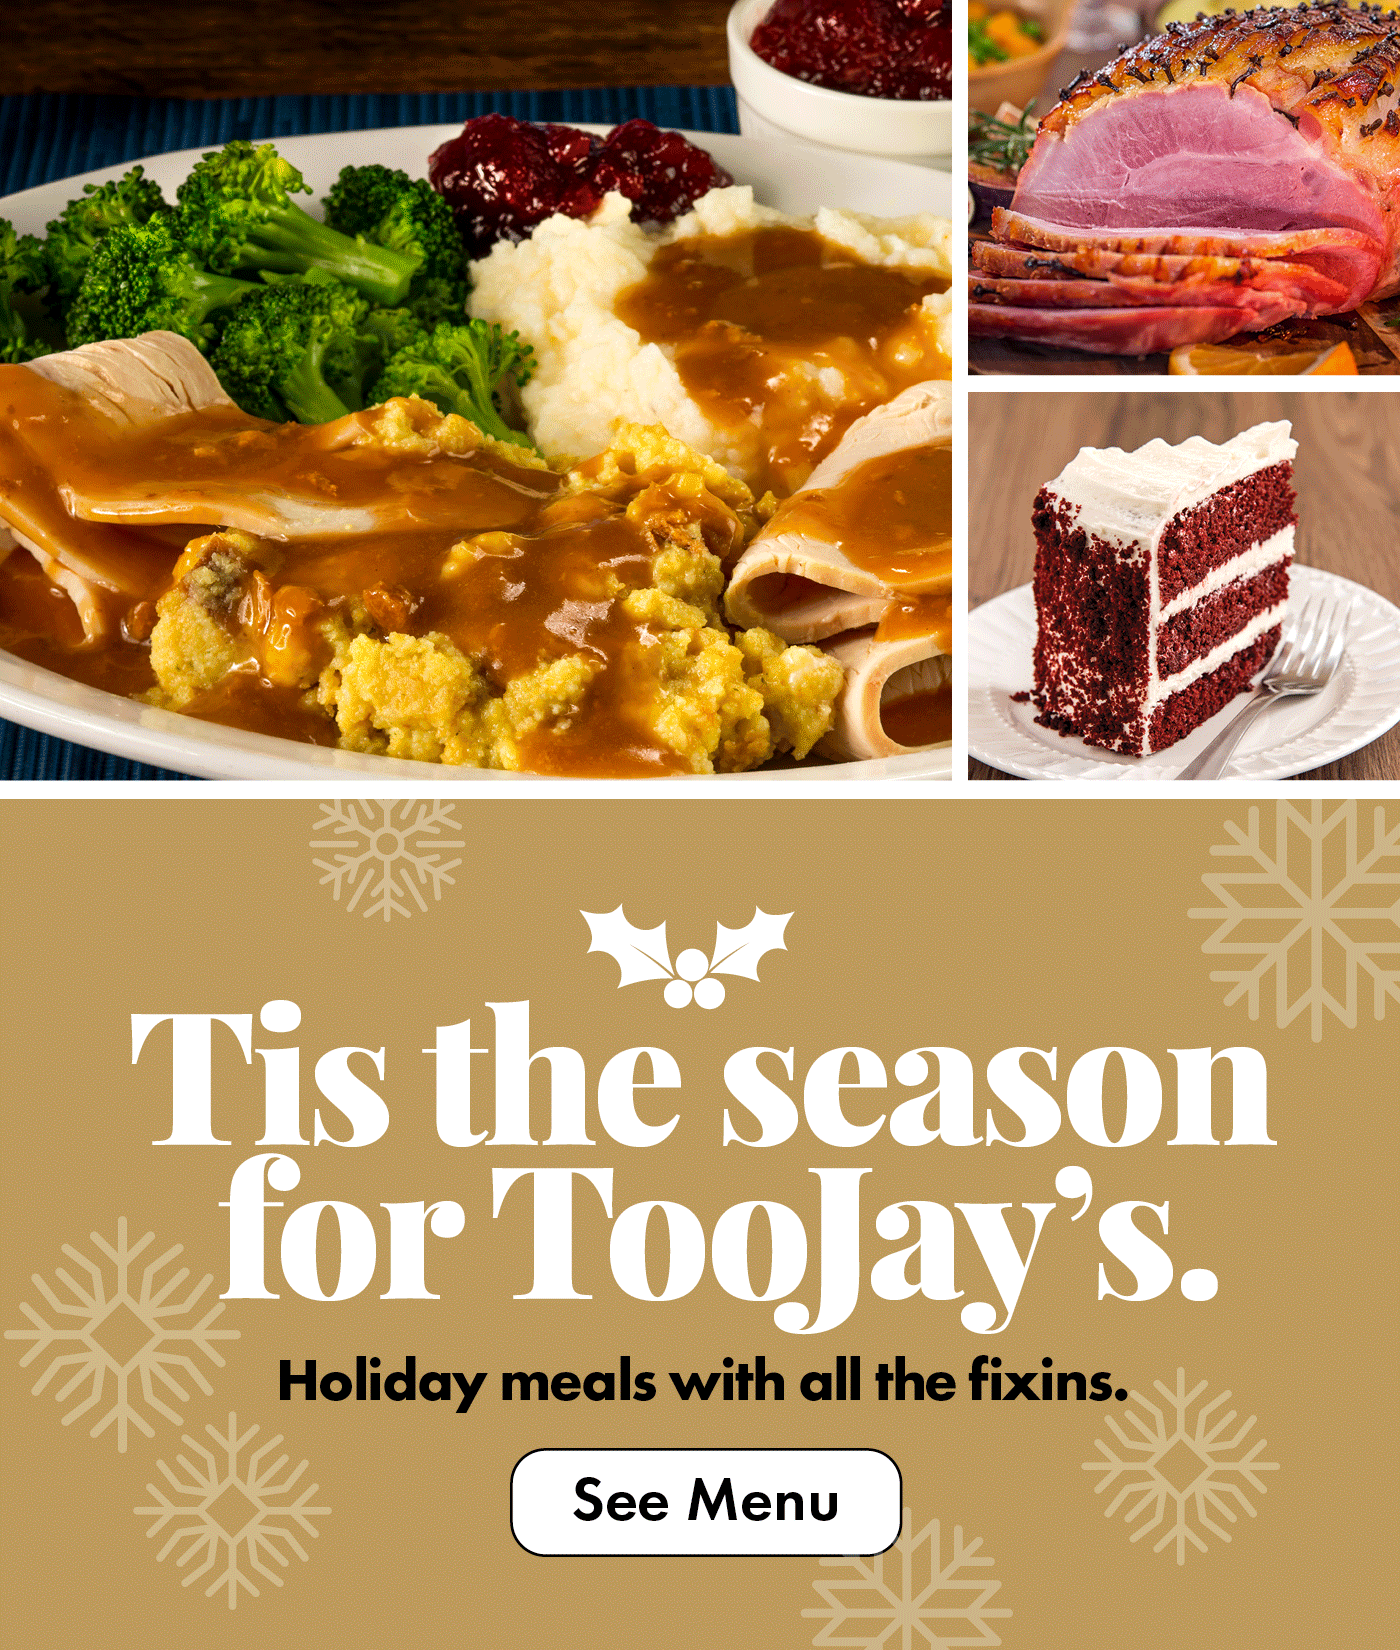 Tis the season for TooJay's. Holiday meals with all the fixings. Click to see the menu